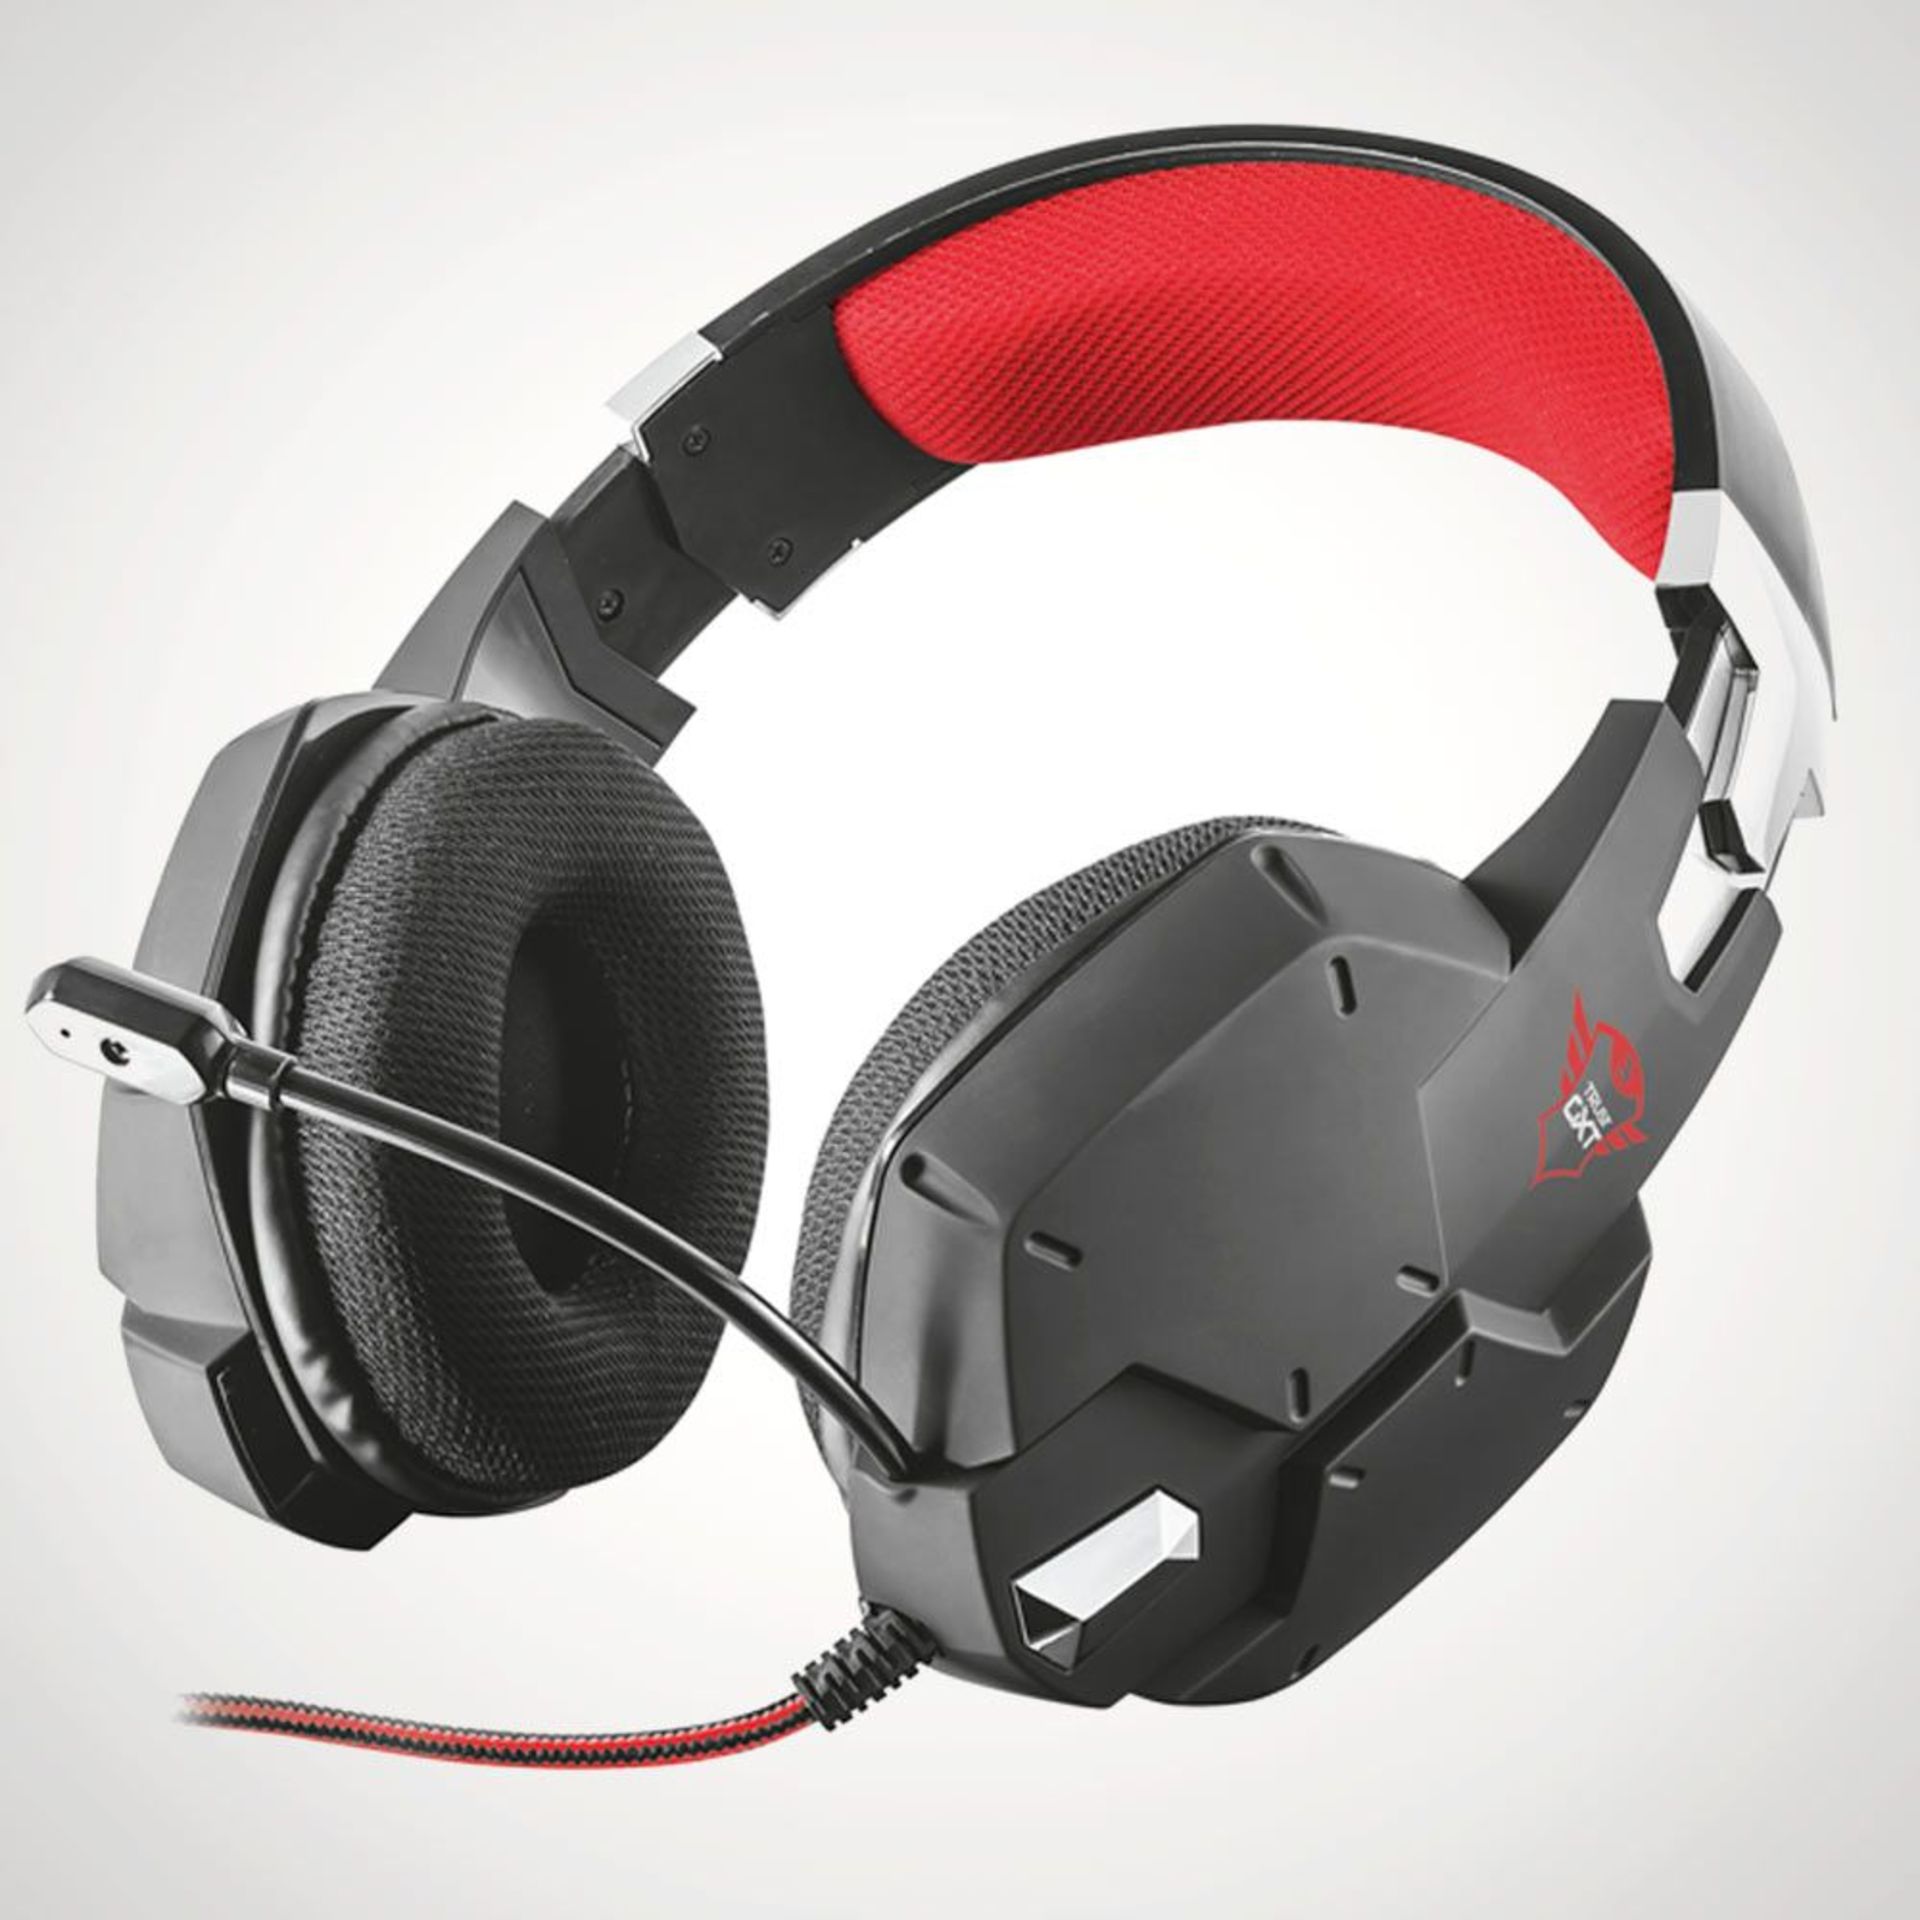 (P5) 6x Trust GXT 322 Carus Multi Platform Gaming Headset RRP £29.99 Each. (Units Have Return To Ma